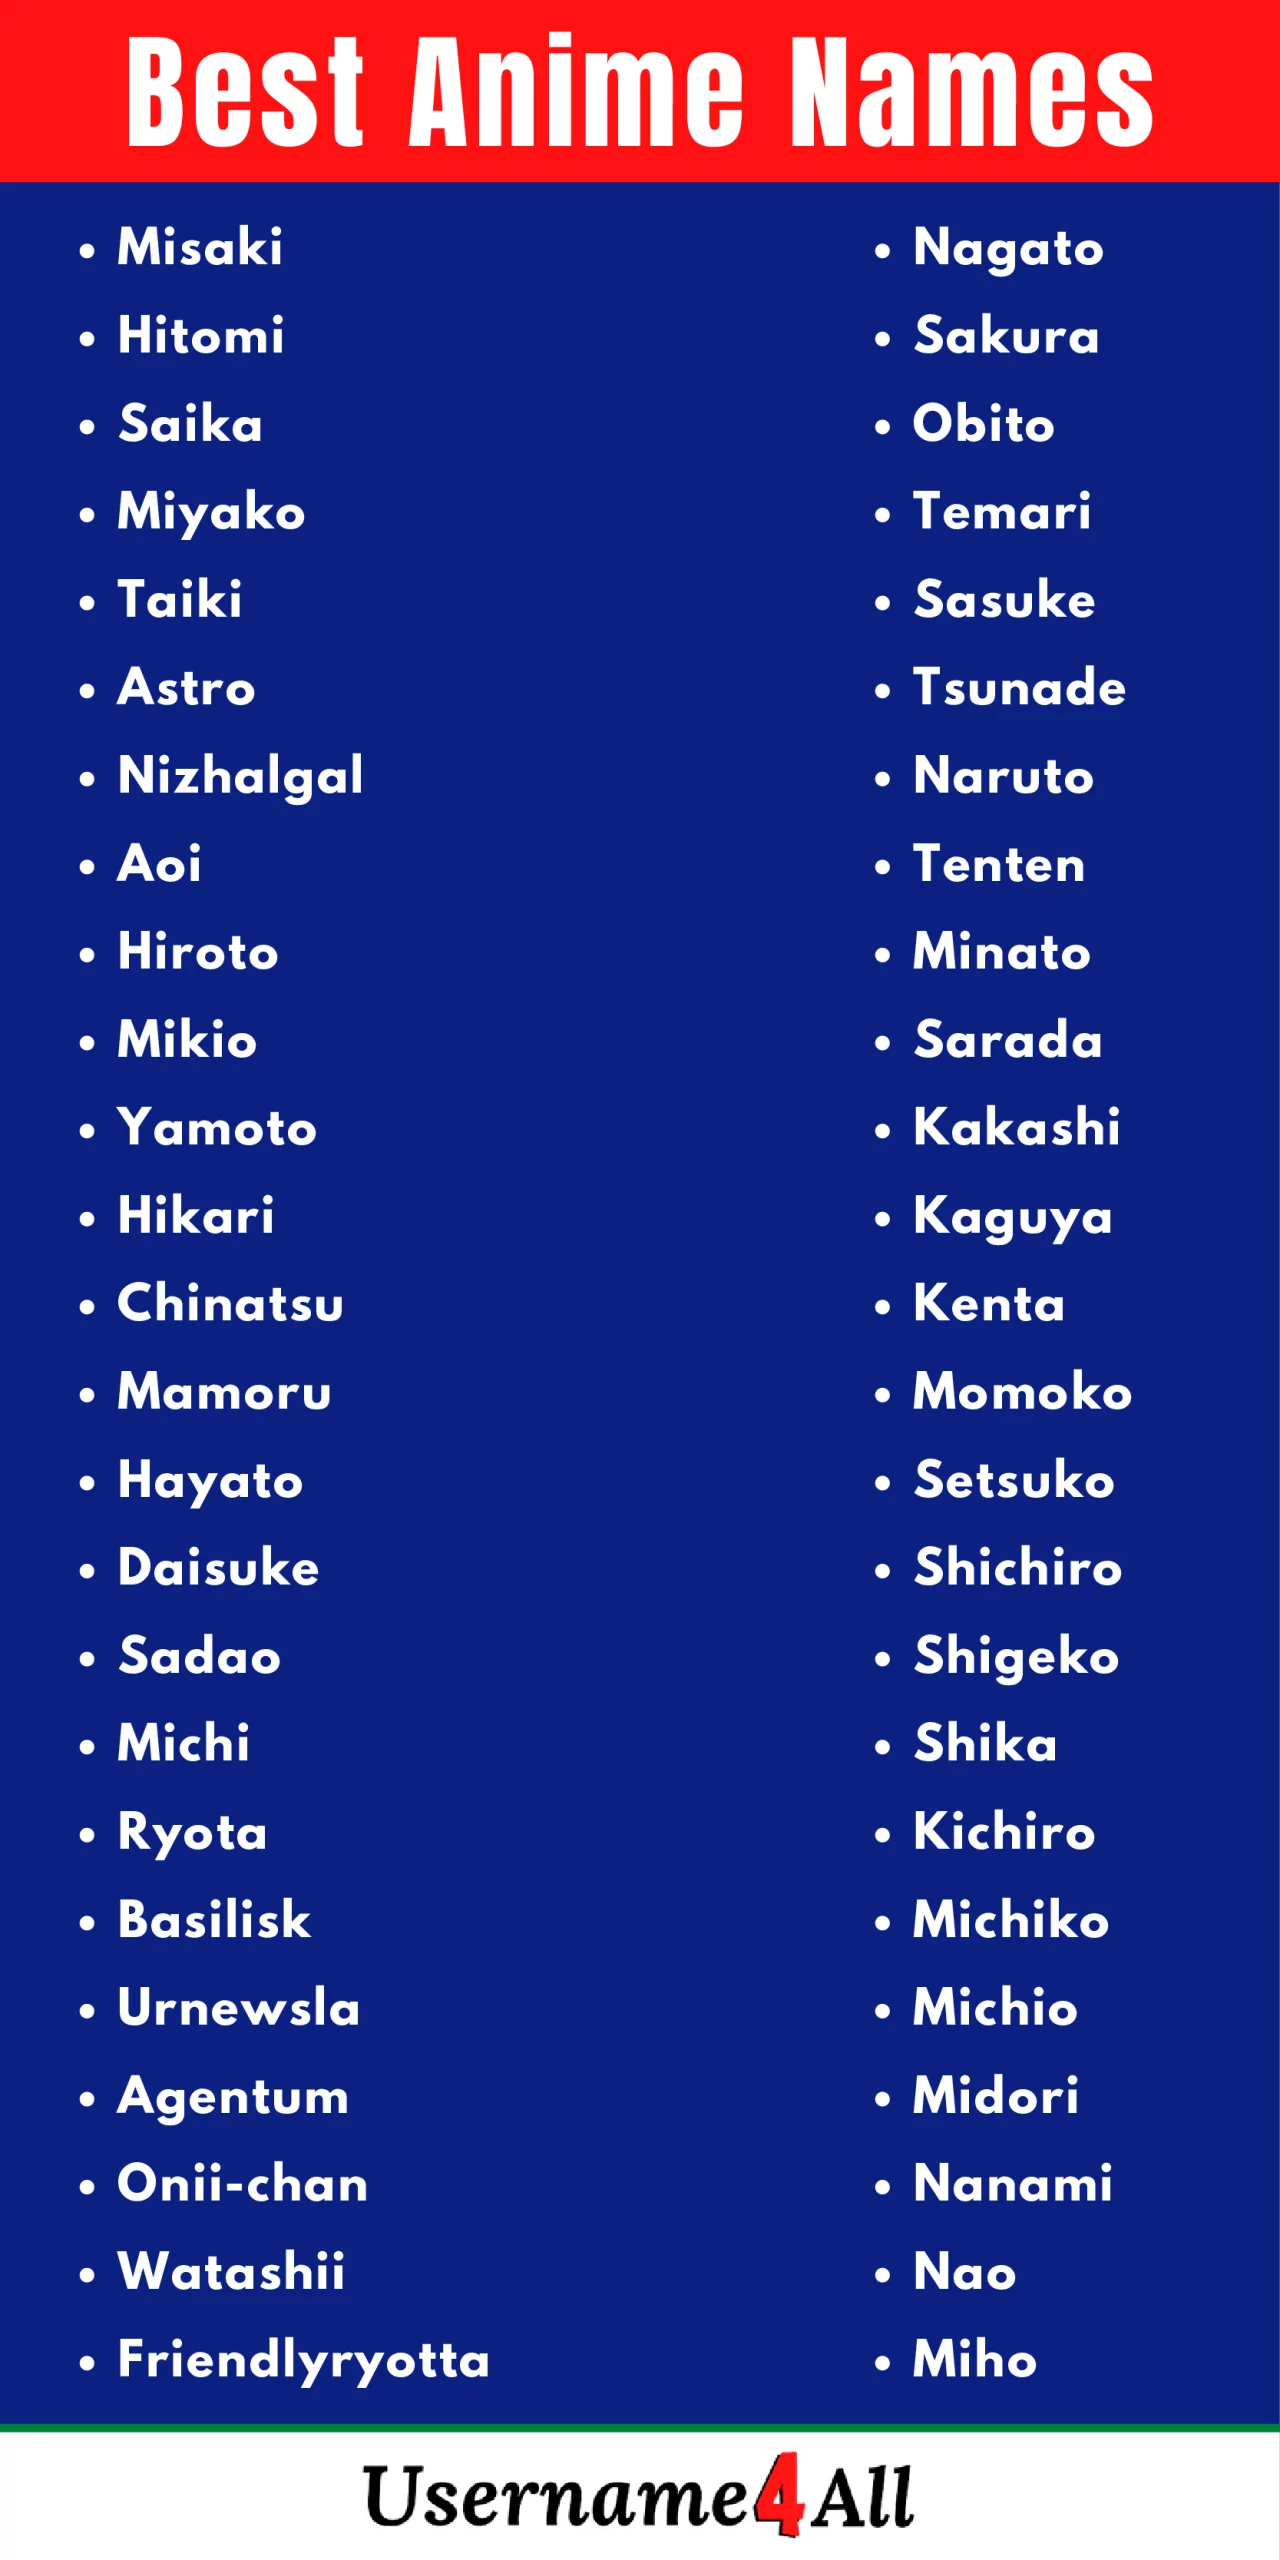 Anime Names scaled